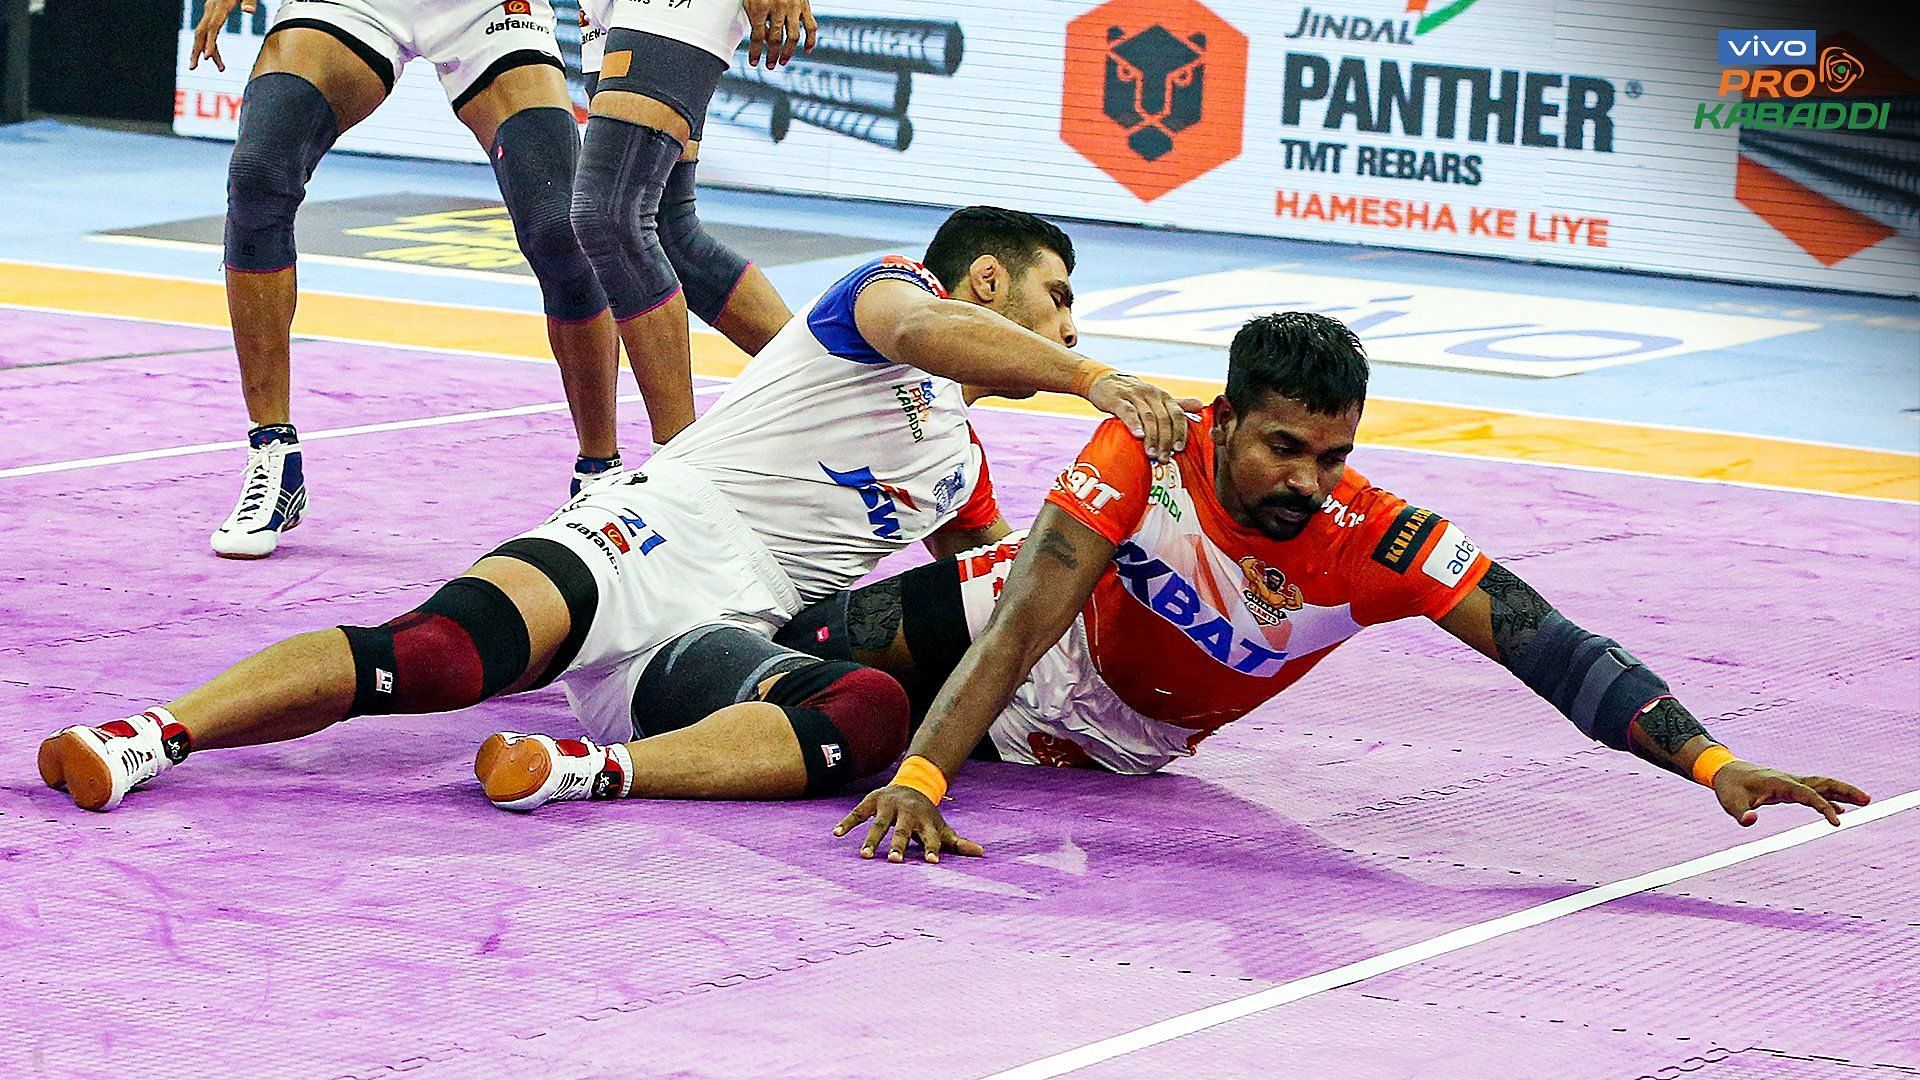 Chandran Ranjit has struggled to perform consistently in PKL 2022 (Image: PKL/Twitter)